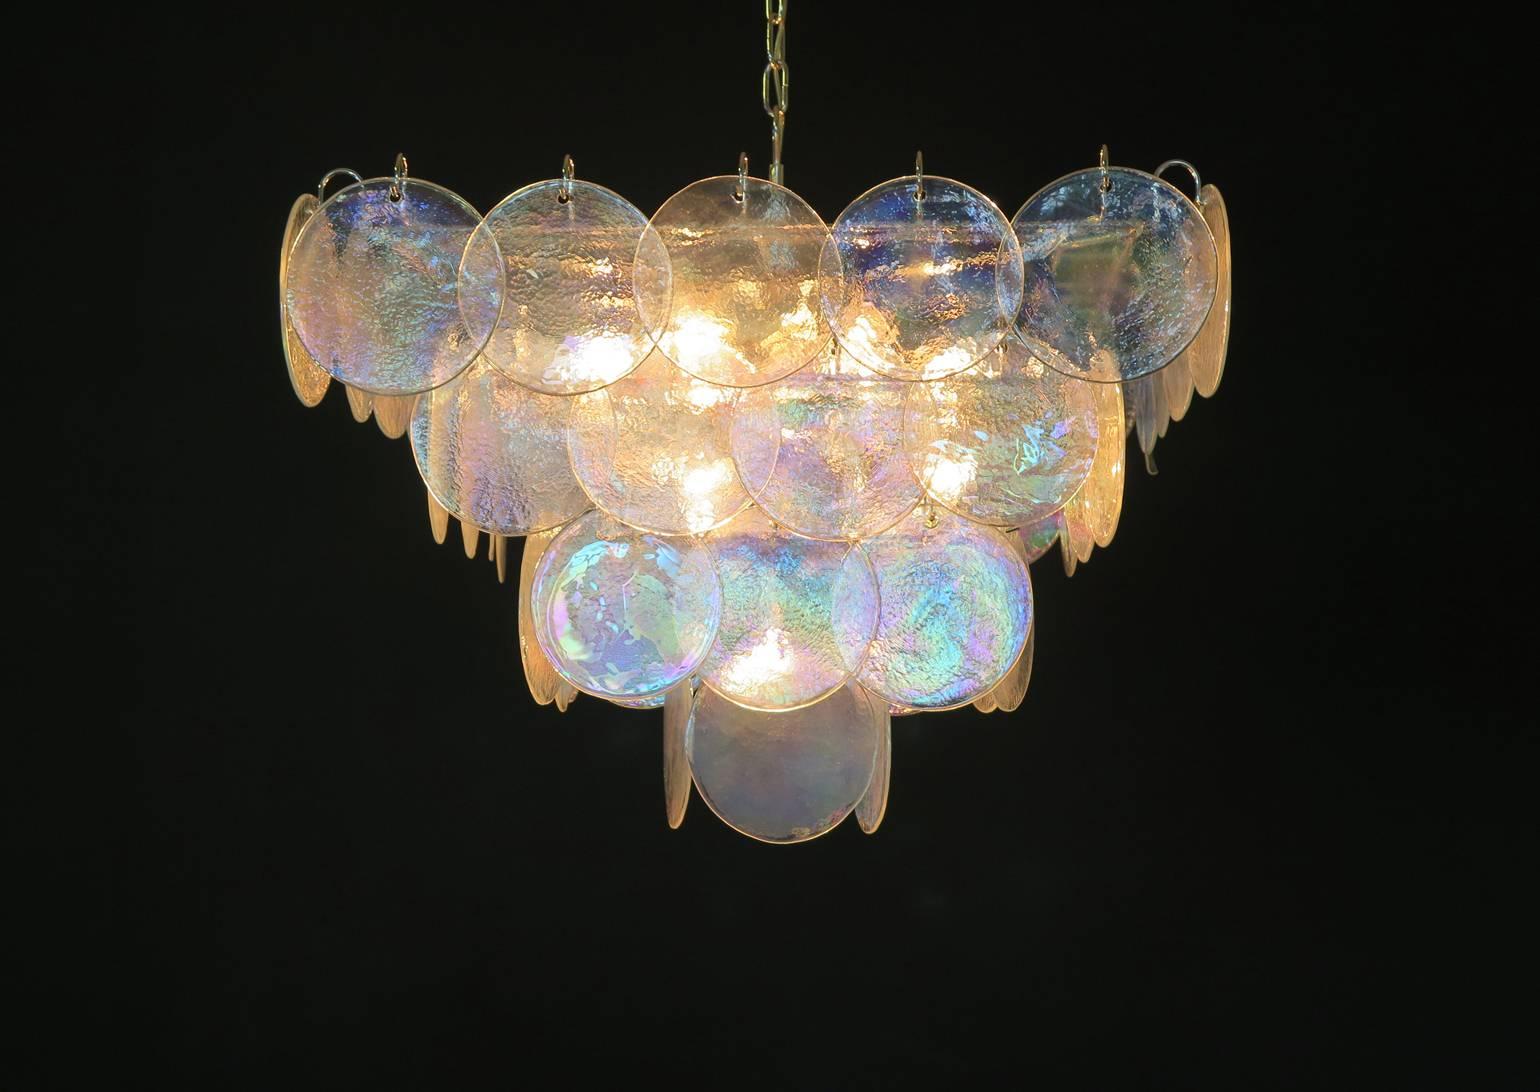 High Quality Murano Chandelier Space Age, Iridescent Glasses 3